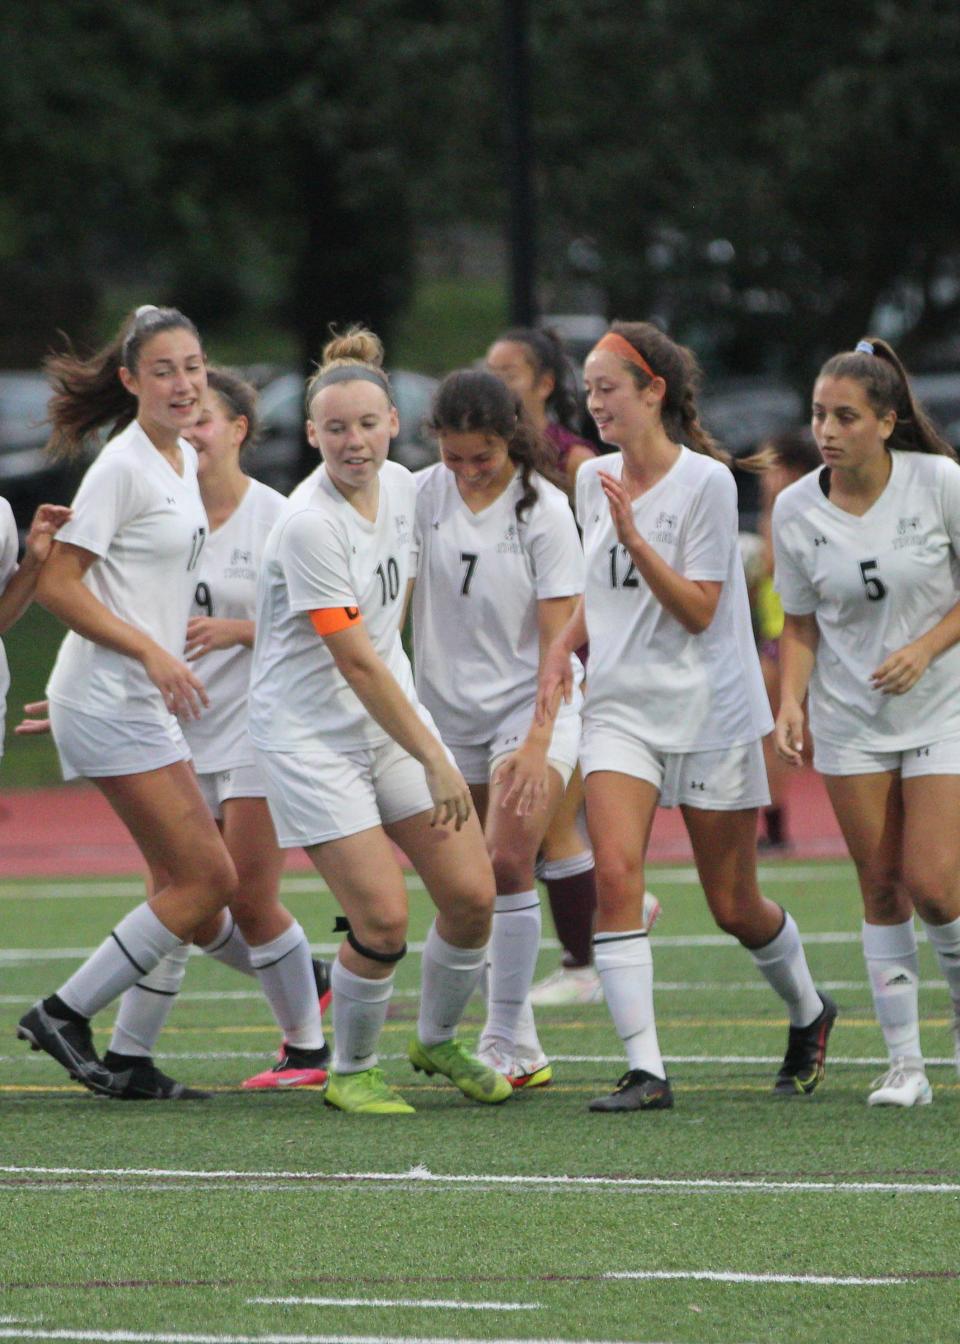 Mamaroneck celebrates with Jessica Bowman (7, center) after her goal during the Tigers' 3-2 overtime win. Bowman had one goal and one assist in the win.